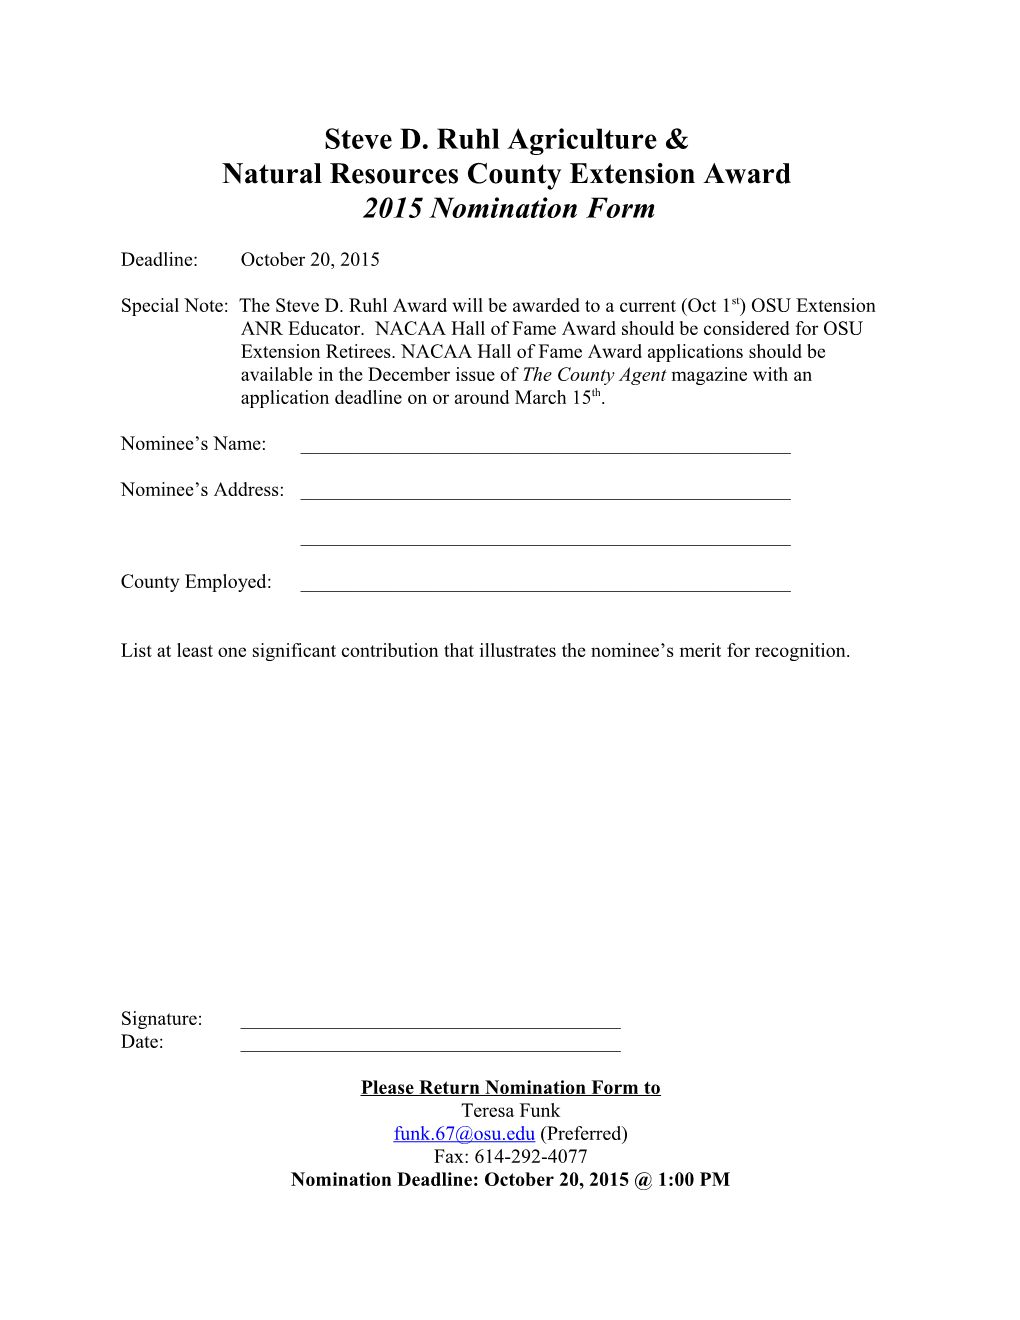 Rough Draft of Nomination Form